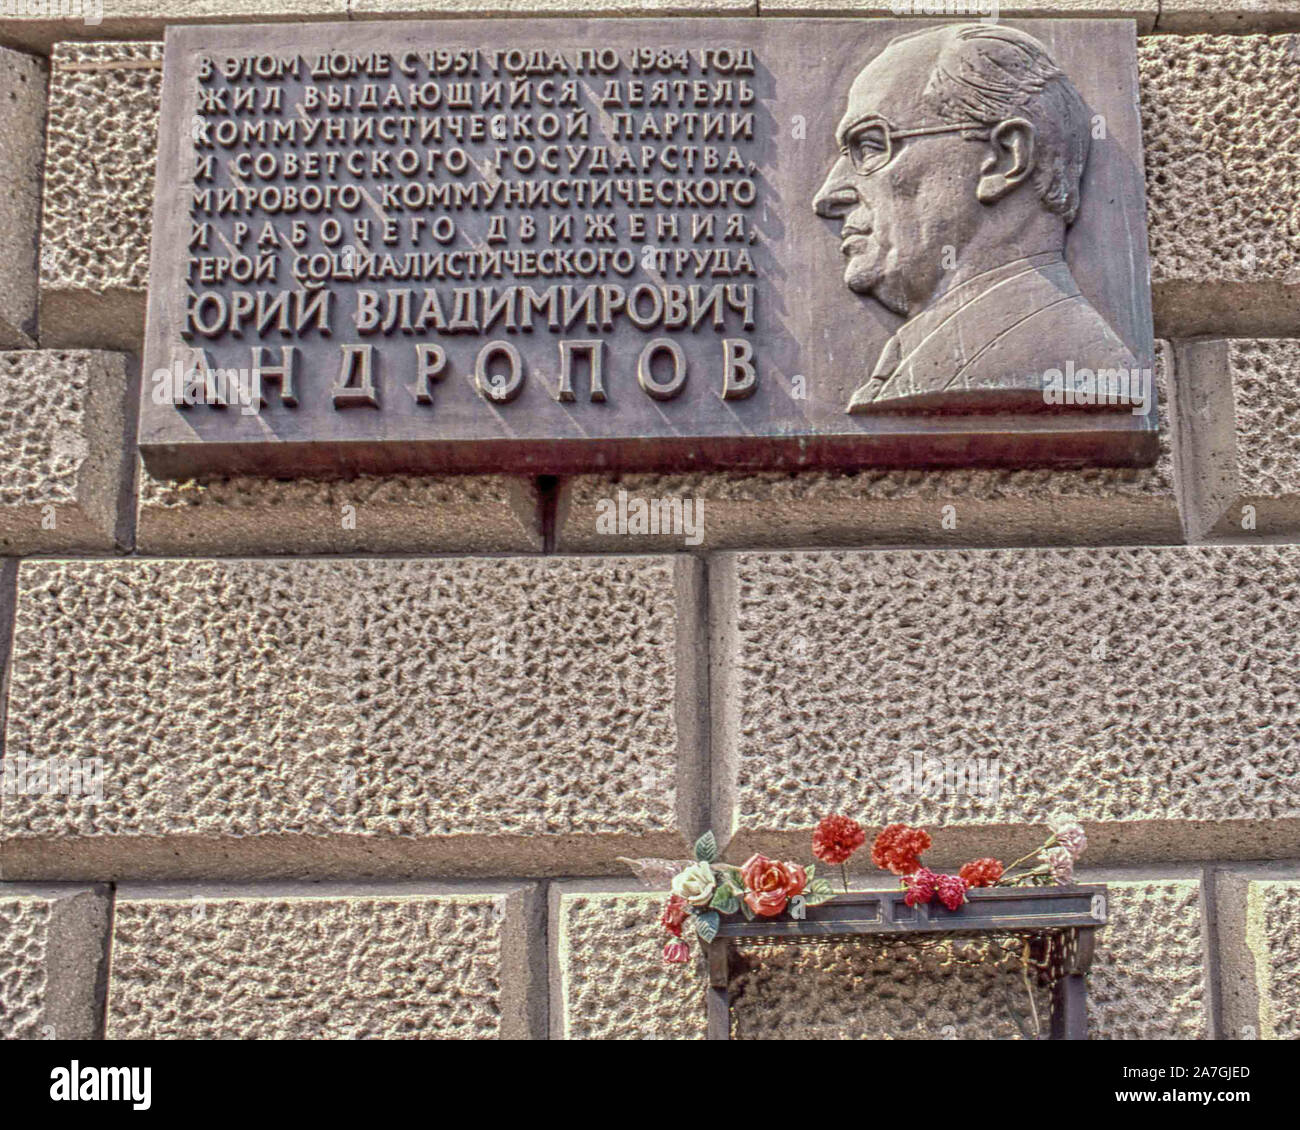 Moscow, Russia. 1st Feb, 1989. A commemorative plaque and a shelf of flowers, on the wall of a stately Moscow apartment building at 26 Kutuzovsky Prospect, (where he and other Soviet leaders lived) honors Yuri V. Andropov. A former head of the KGB, he was General Secretary of the Communist Party of the Soviet Union from November 1982 until his death in February 1984. Credit: Arnold Drapkin/ZUMA Wire/Alamy Live News Stock Photo